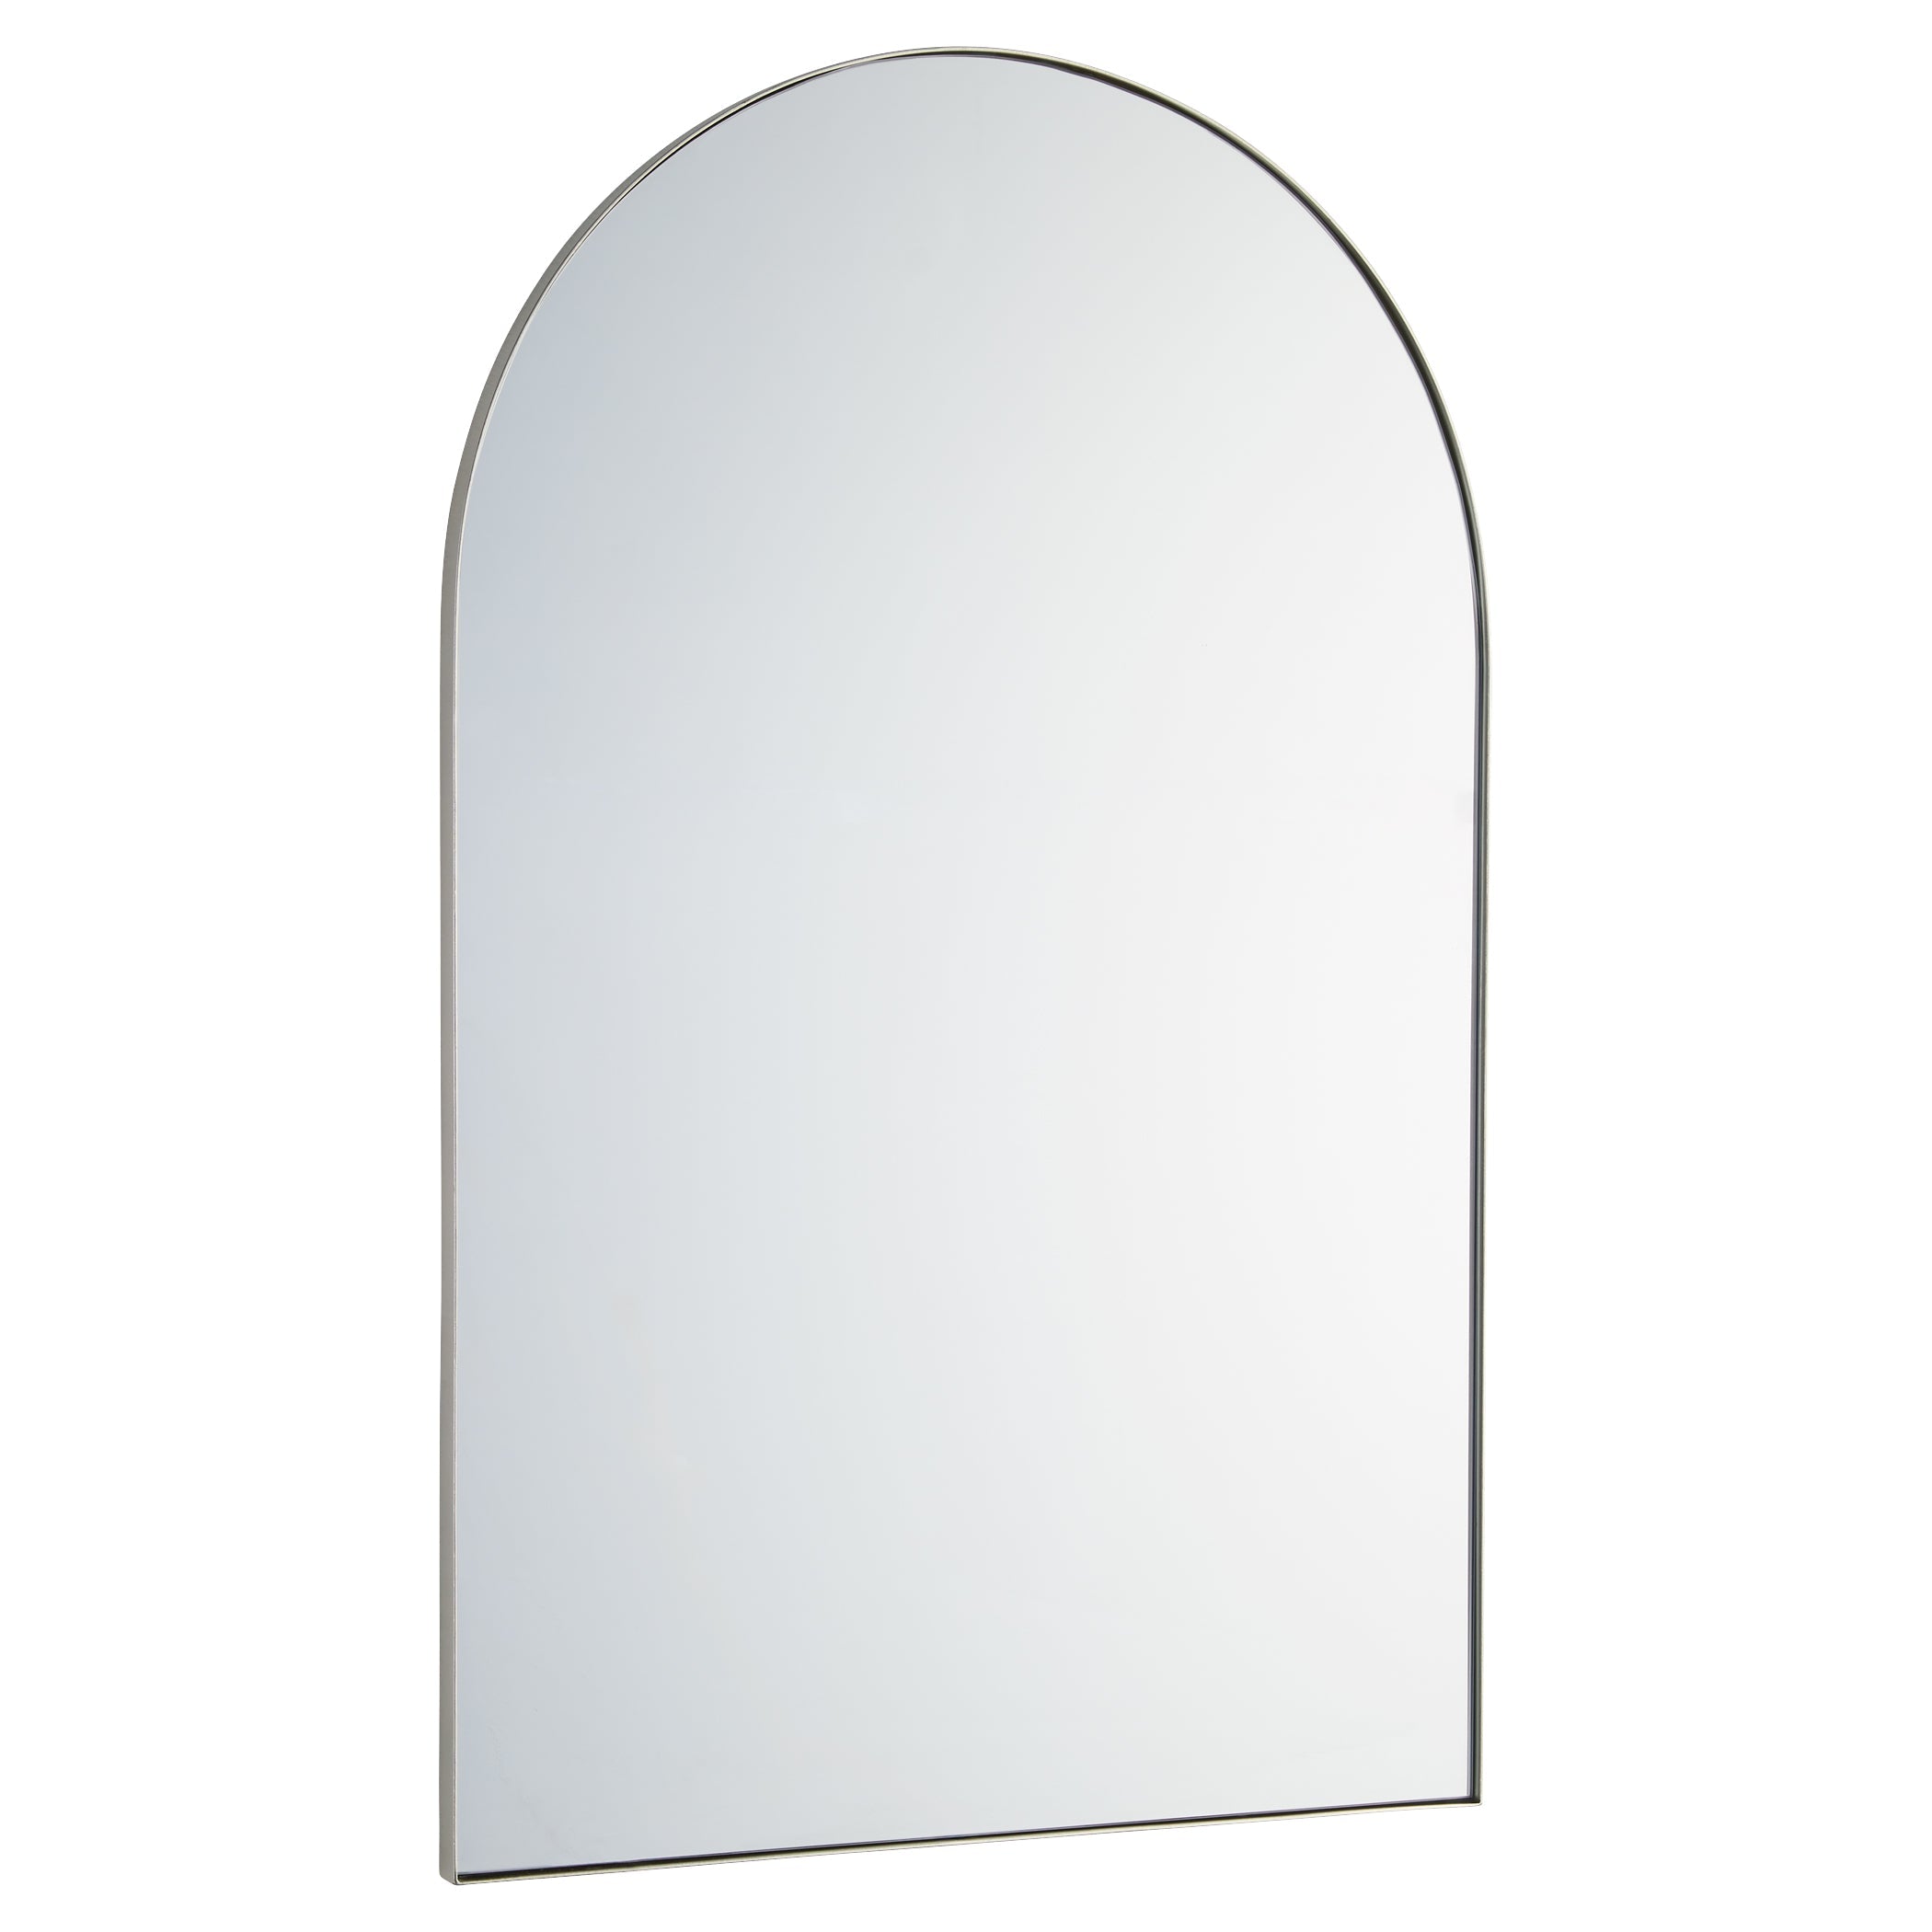 Quorum 14-2438-61 Mirror - Silver Finished